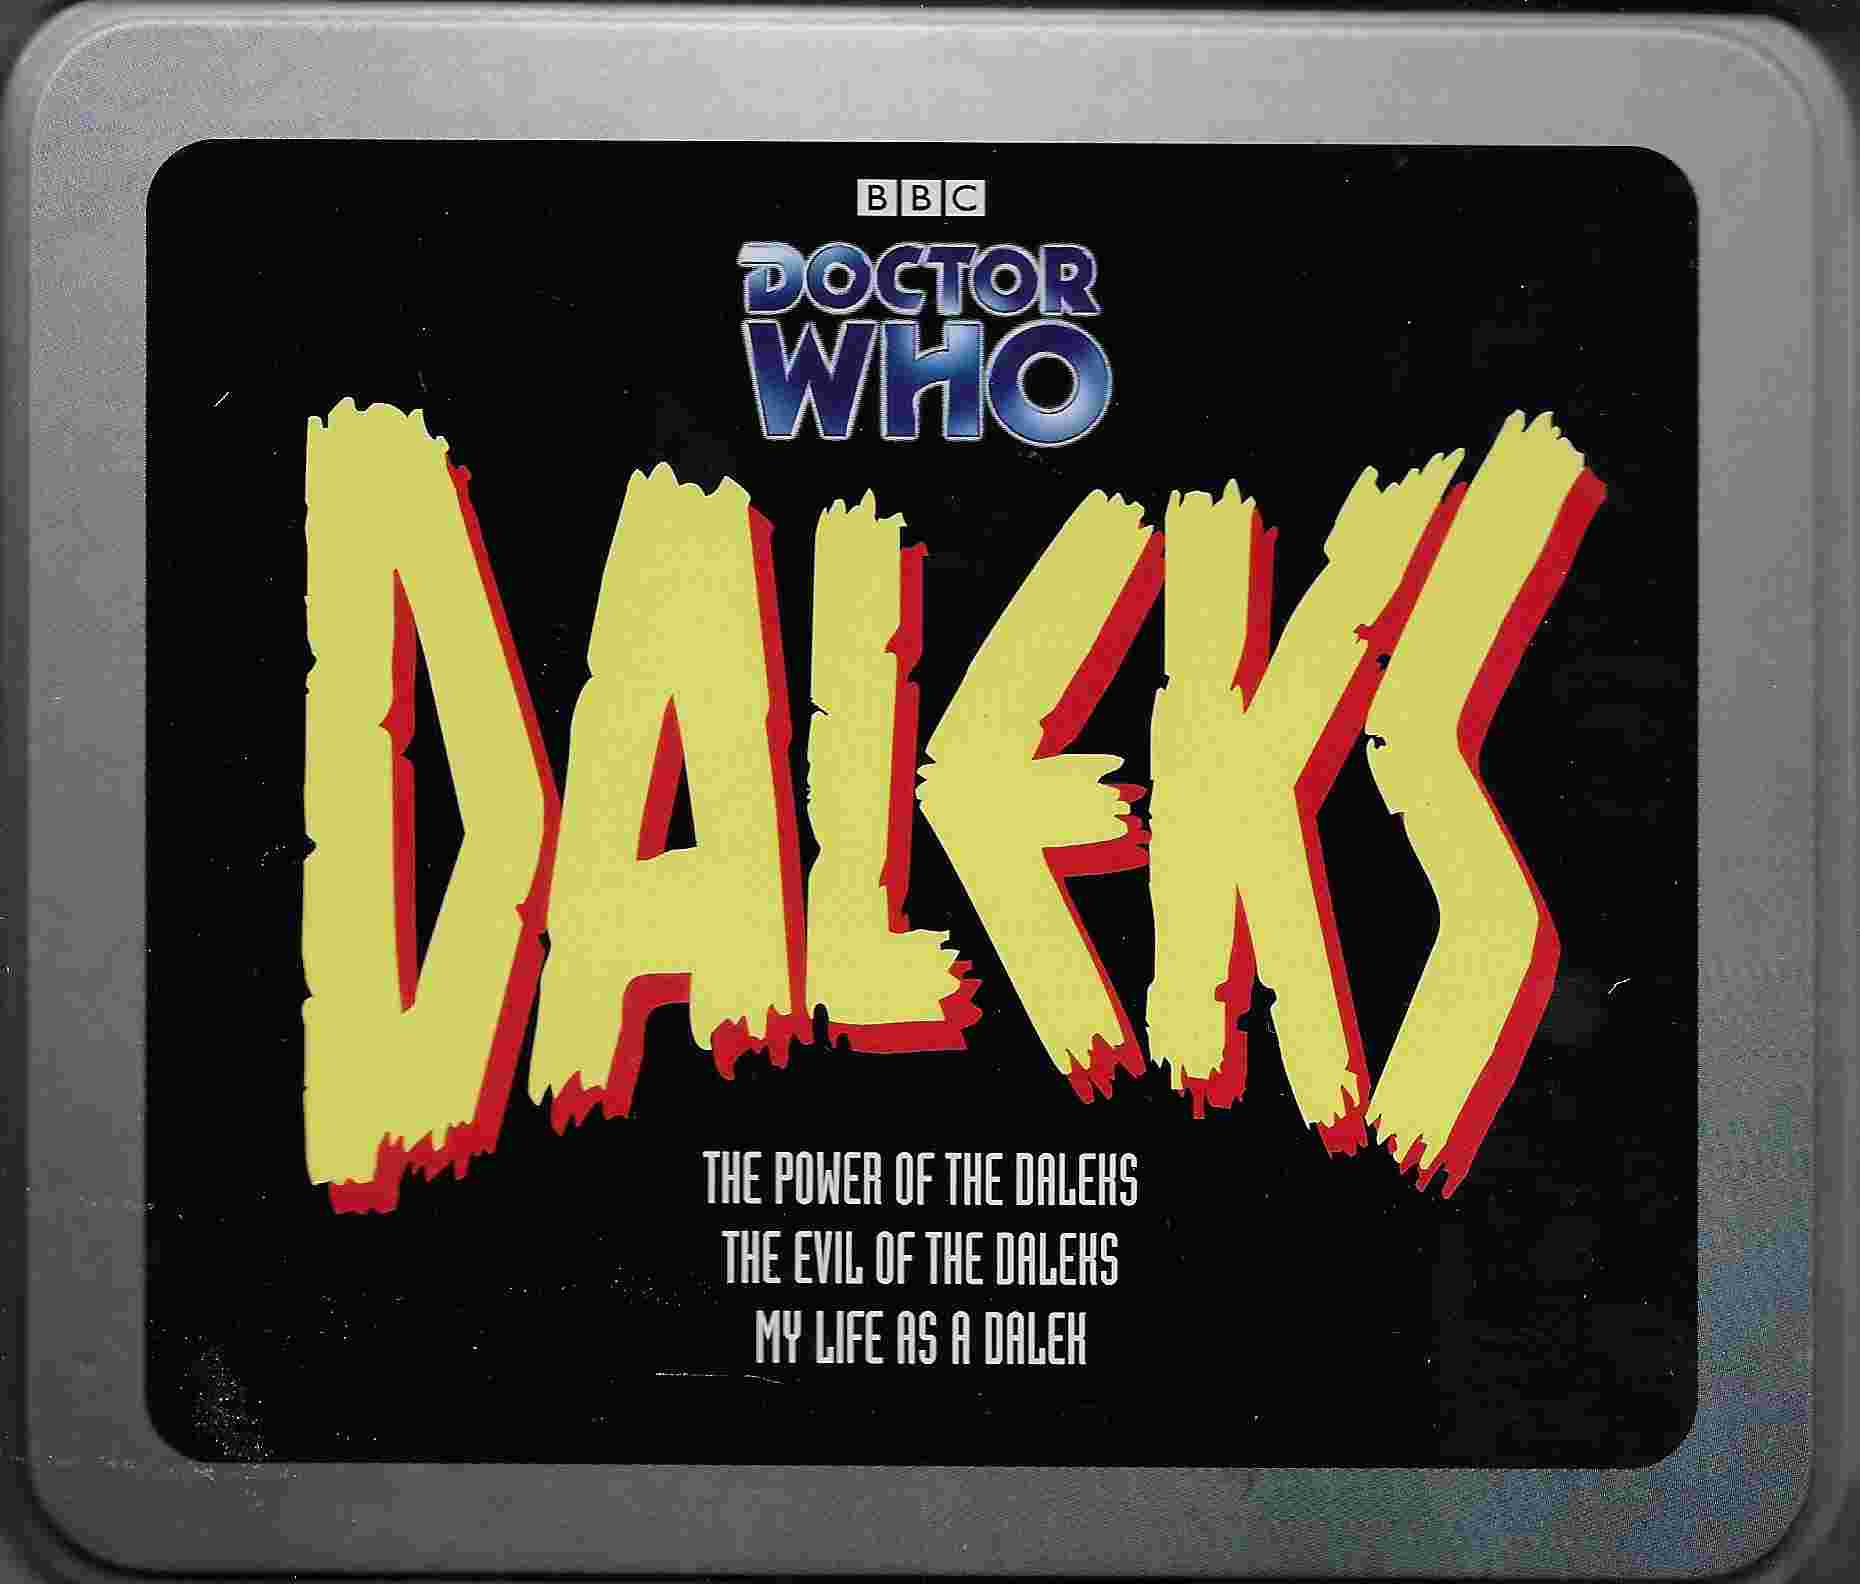 Picture of Doctor Who - Daleks by artist David Whitaker / Mark Gatiss from the BBC cds - Records and Tapes library